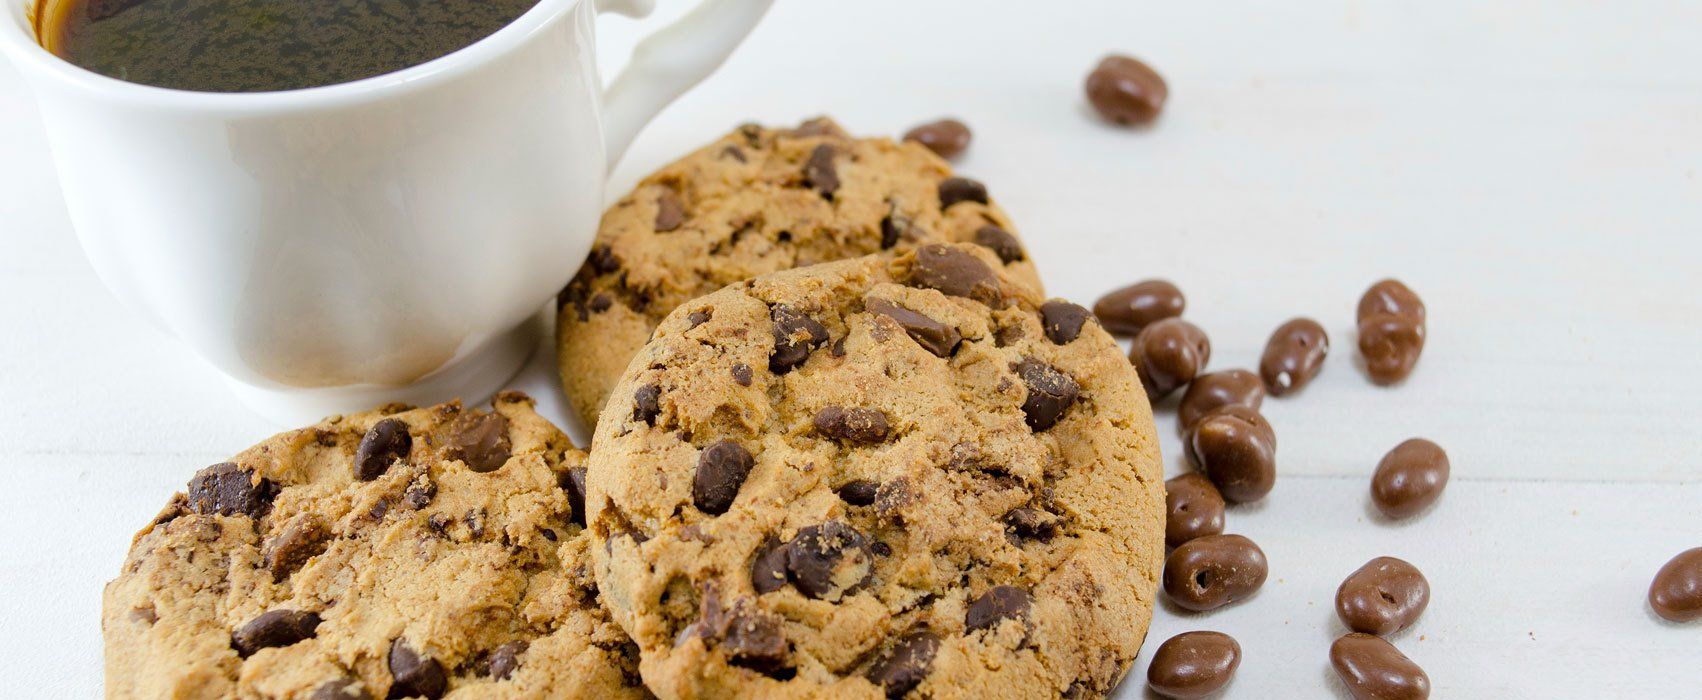 chocolate chip cookies from Jonathan Lord Cheesecakes & Desserts in Bohemia, NY